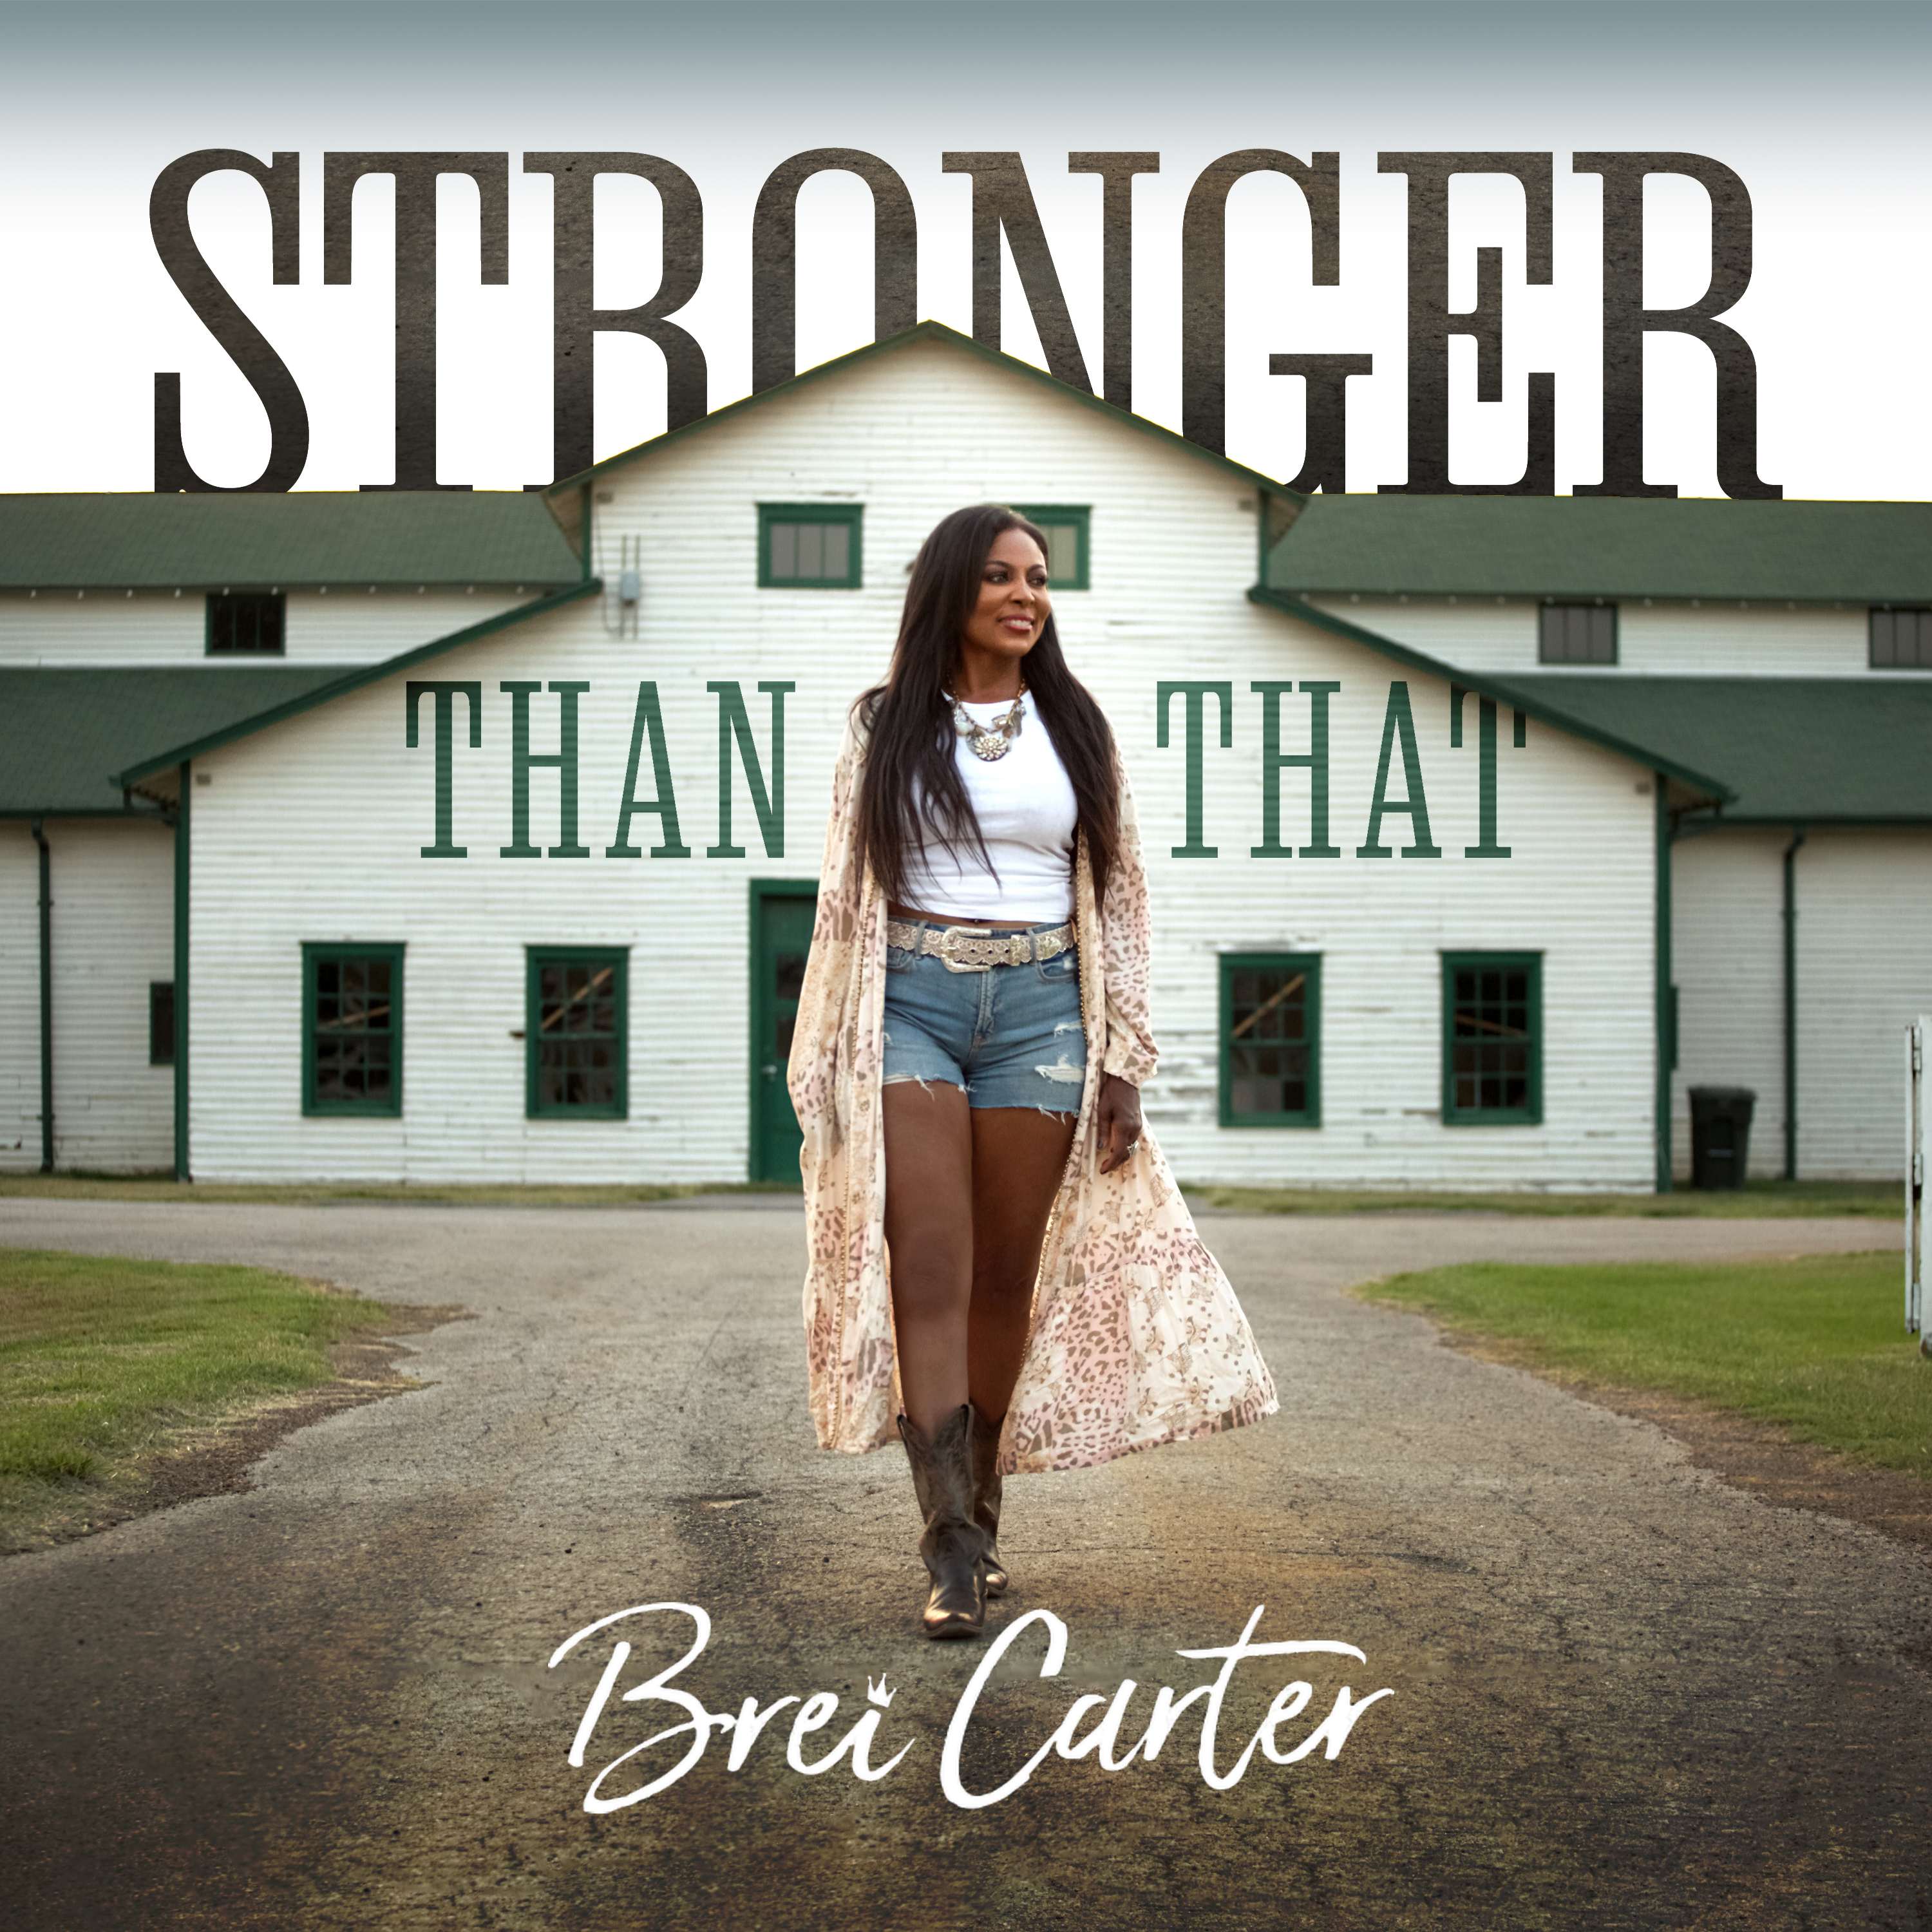 Brei-Carter-Stronger-Than-That-Cover-Artwork-300-dpi-copy.png